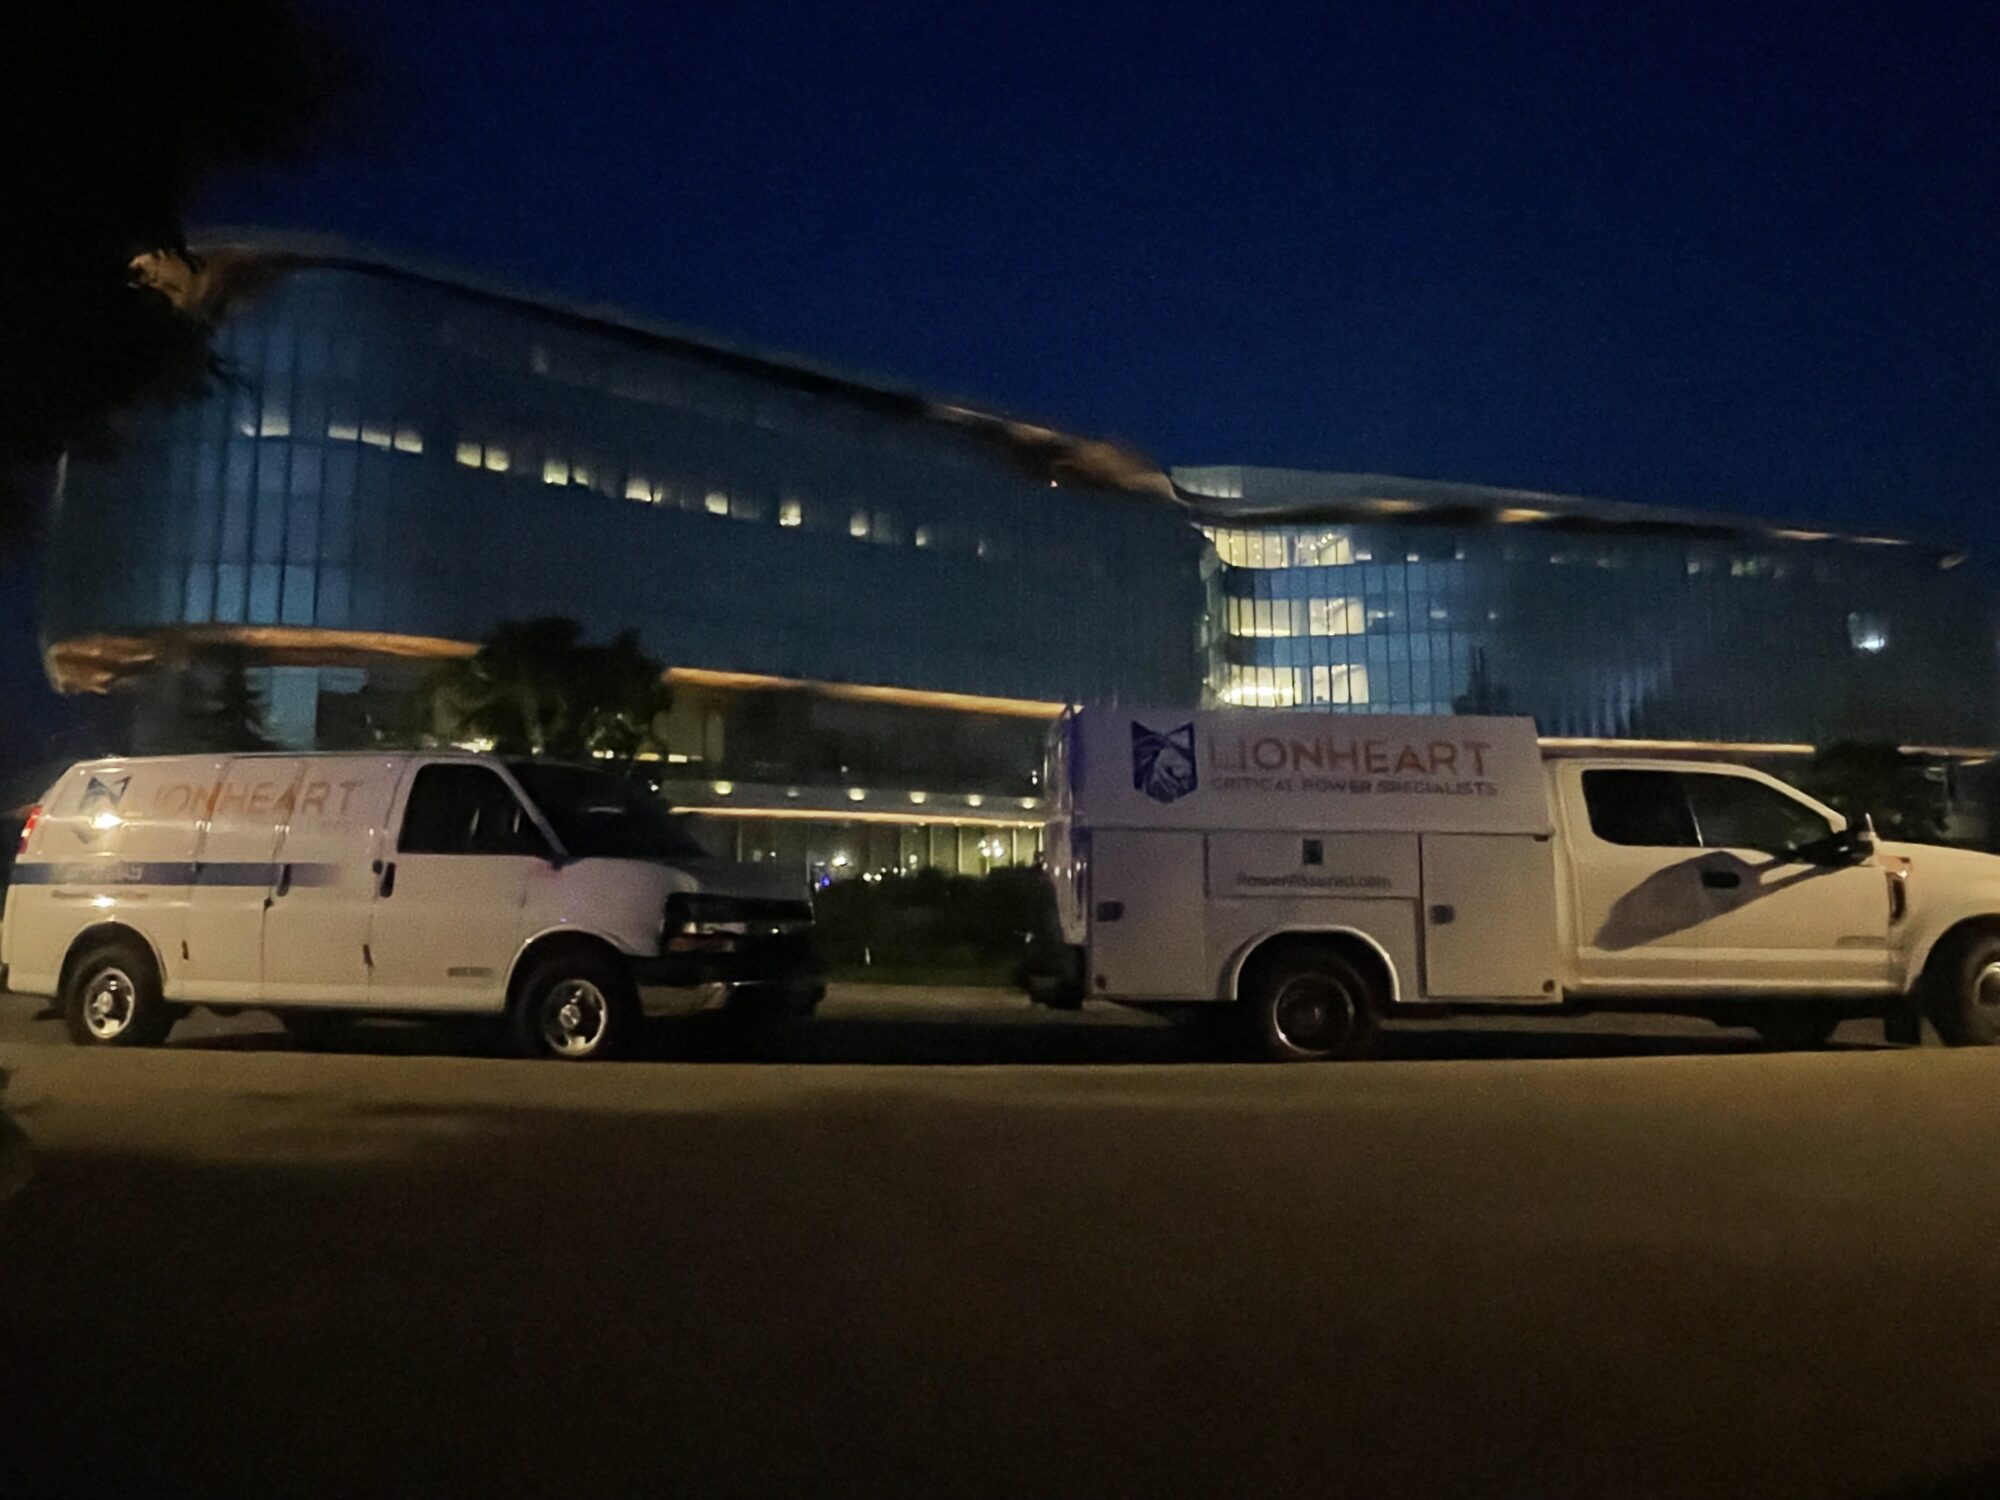 Two LionHeart service trucks parked in the night time